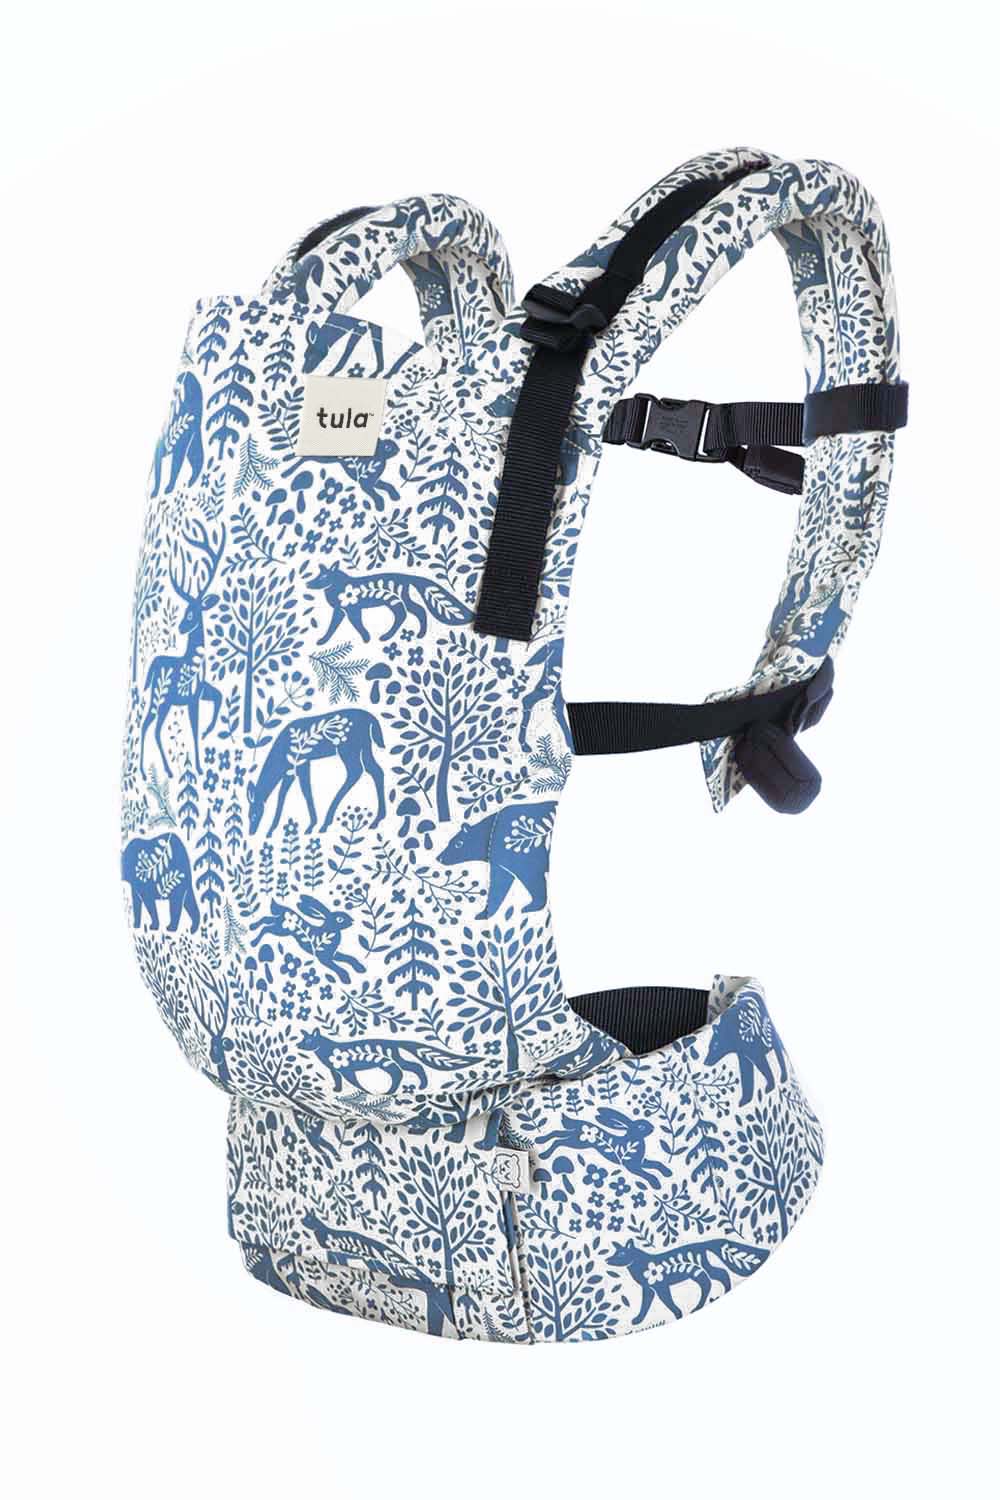 Tula Free-to-Grow Baby Carrier Moonlit Forest